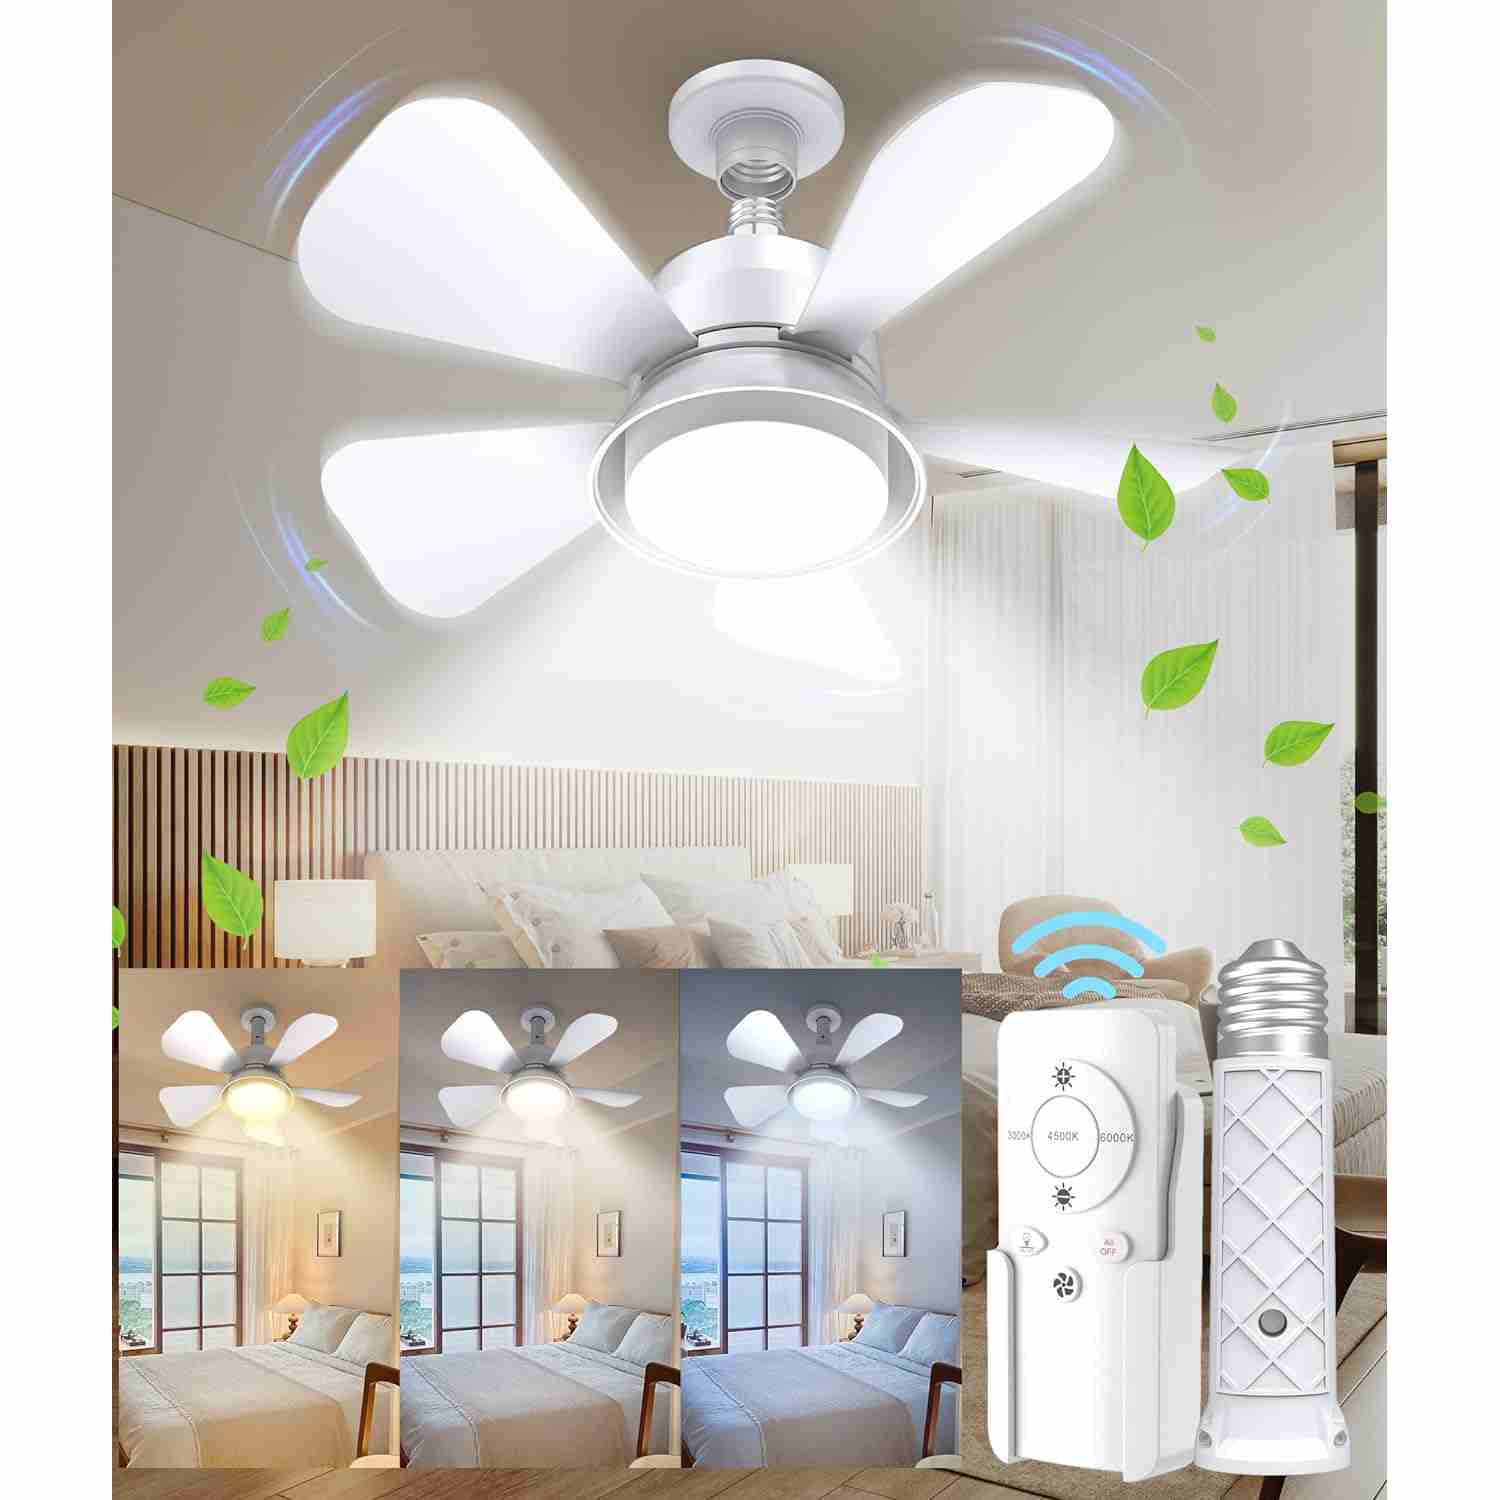 socket-fan-light-ceiling-fans-with-lights-and-remote with cash back rebate